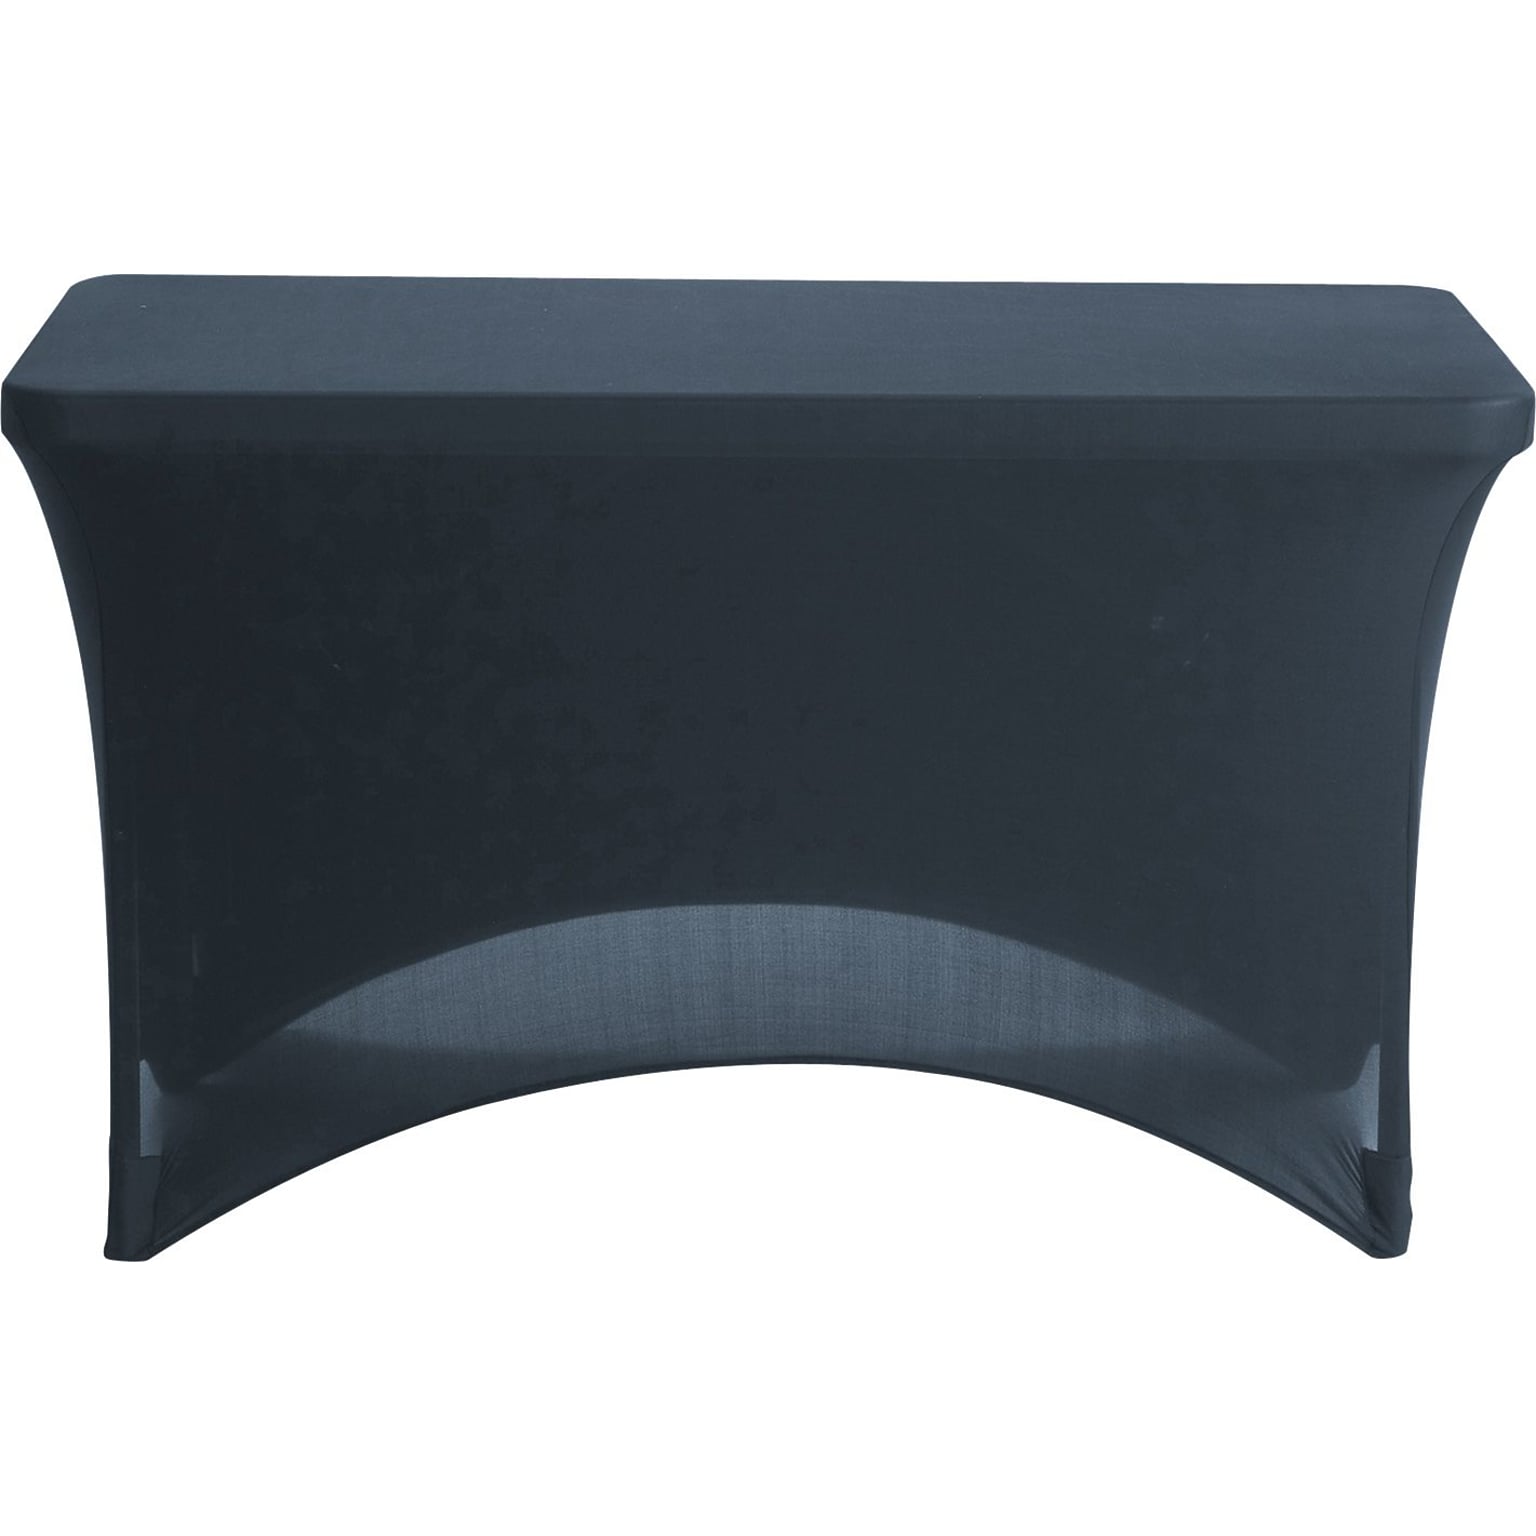 Fabric Table Cover 4 Black